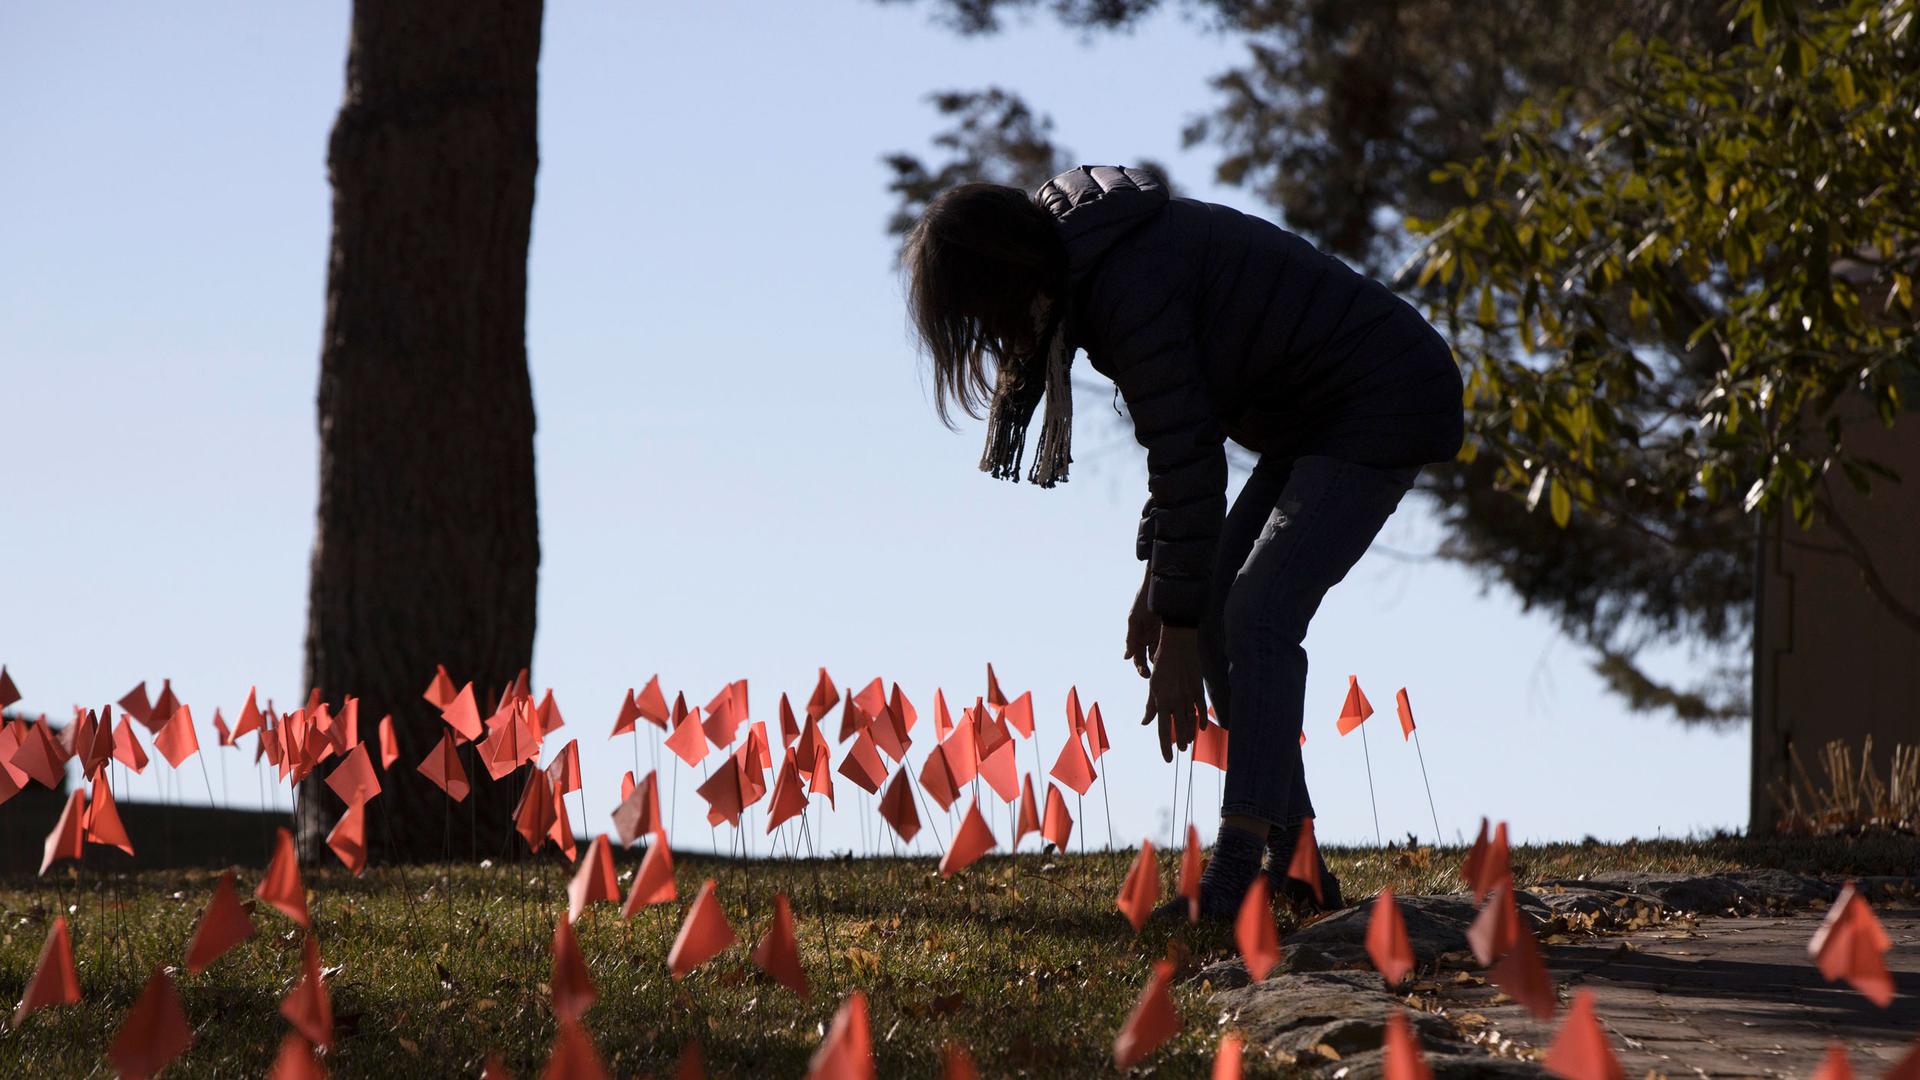 A woman in shown in shadow bending over near dozens of small red flags in the ground.